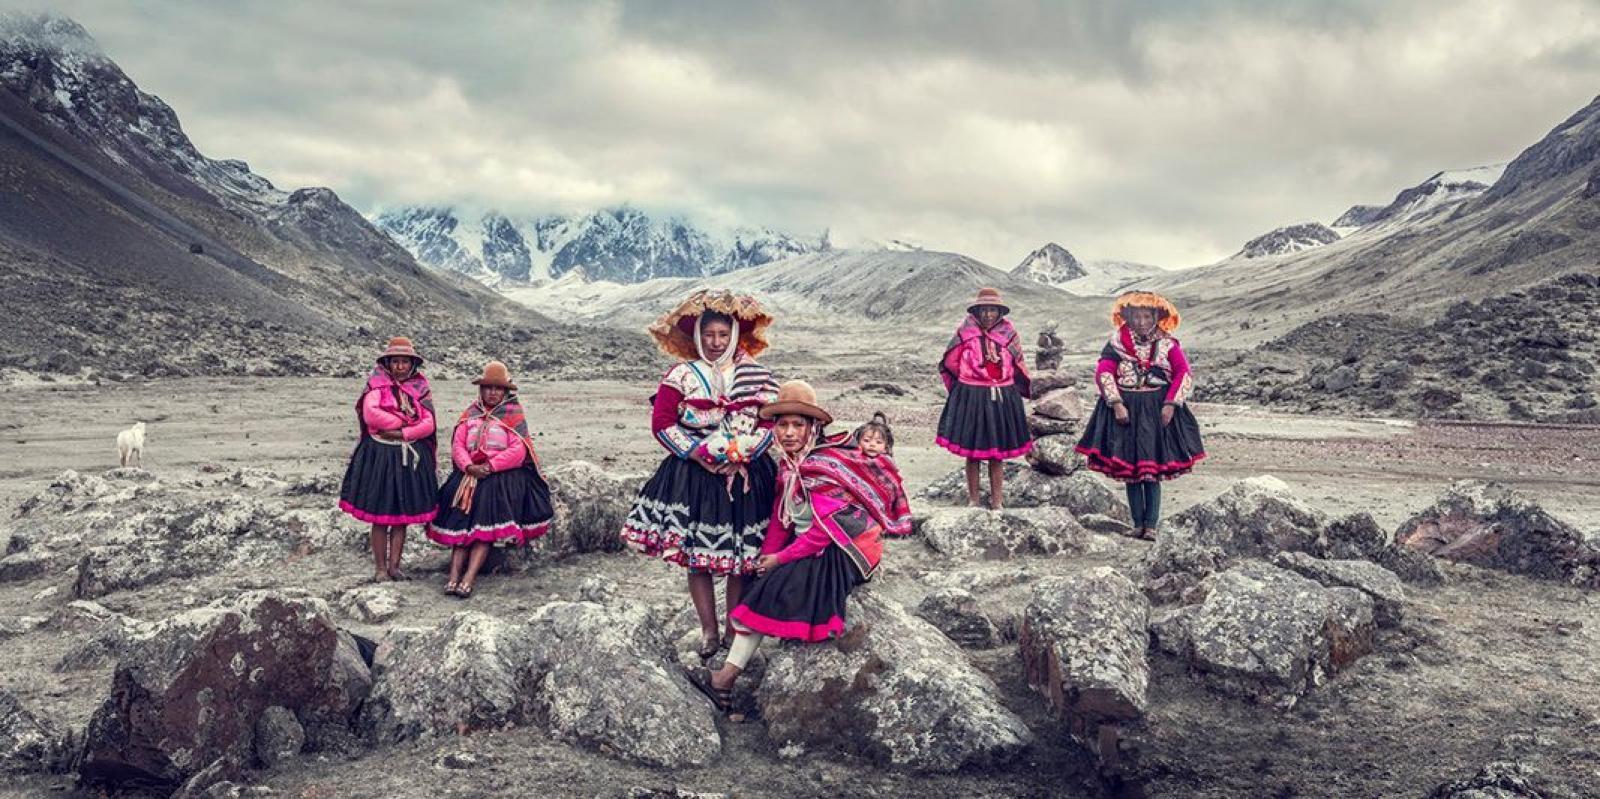 XL 25 Q’ero & Ausangate women  Ausangate mountain range, Andes  Peru 2018

Situated on the central west coast of South America, this large country encompasses a great variety of biotopes and climates, in mountain, desert and coastal regions. 

One